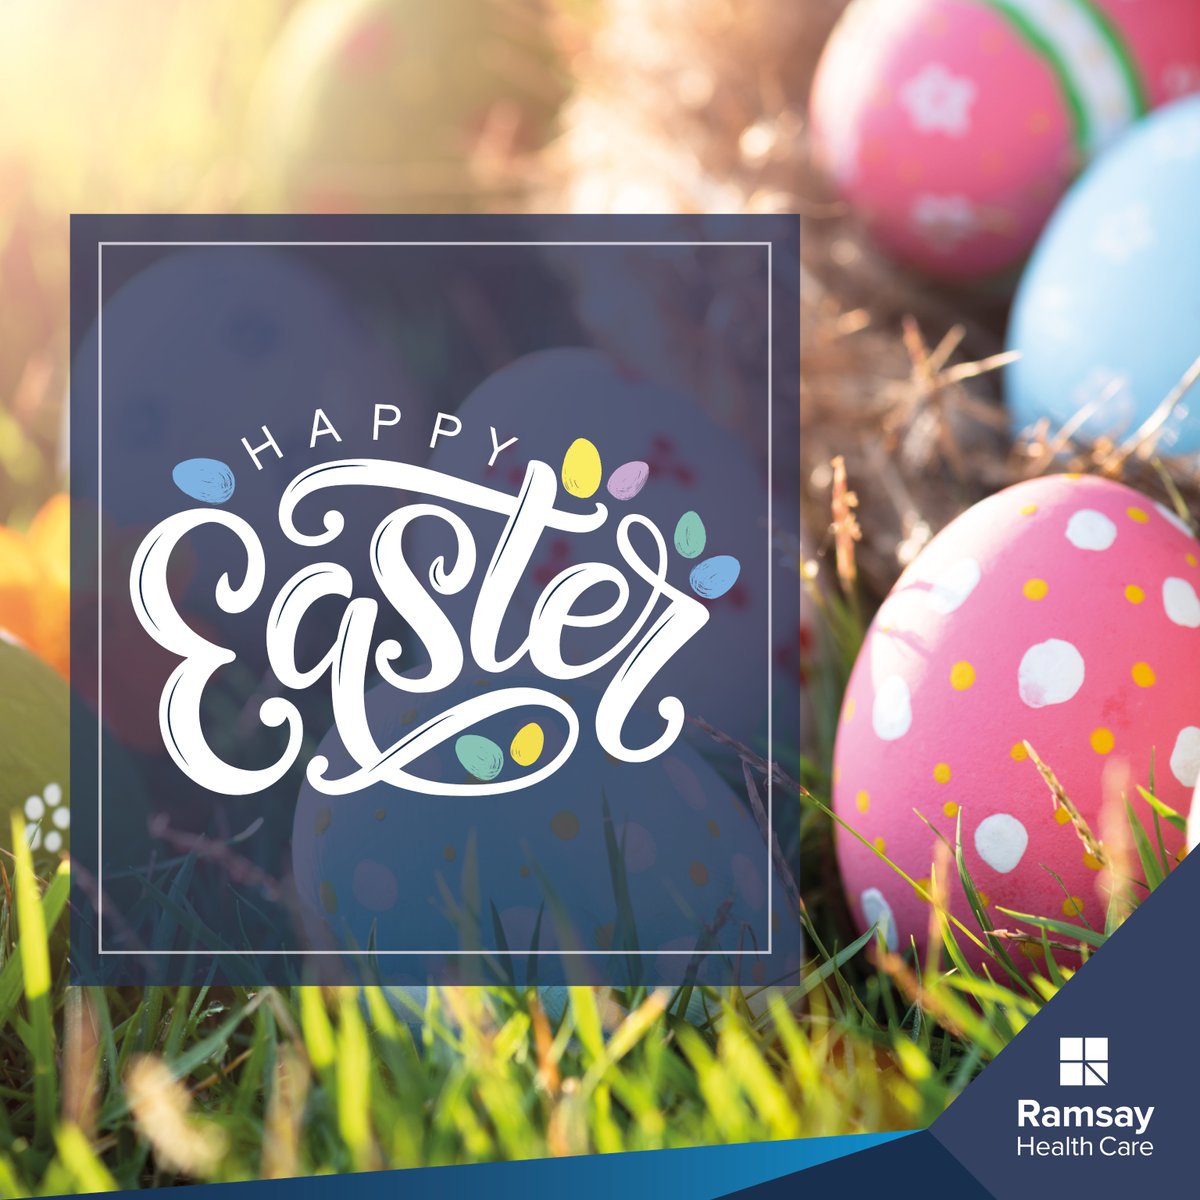 Happy Easter from all of us at Ramsay Health Care UK 🐣 Wishing you and your loved ones a joyful and rejuvenating Easter celebration filled with love, laughter, and chocolate treats!